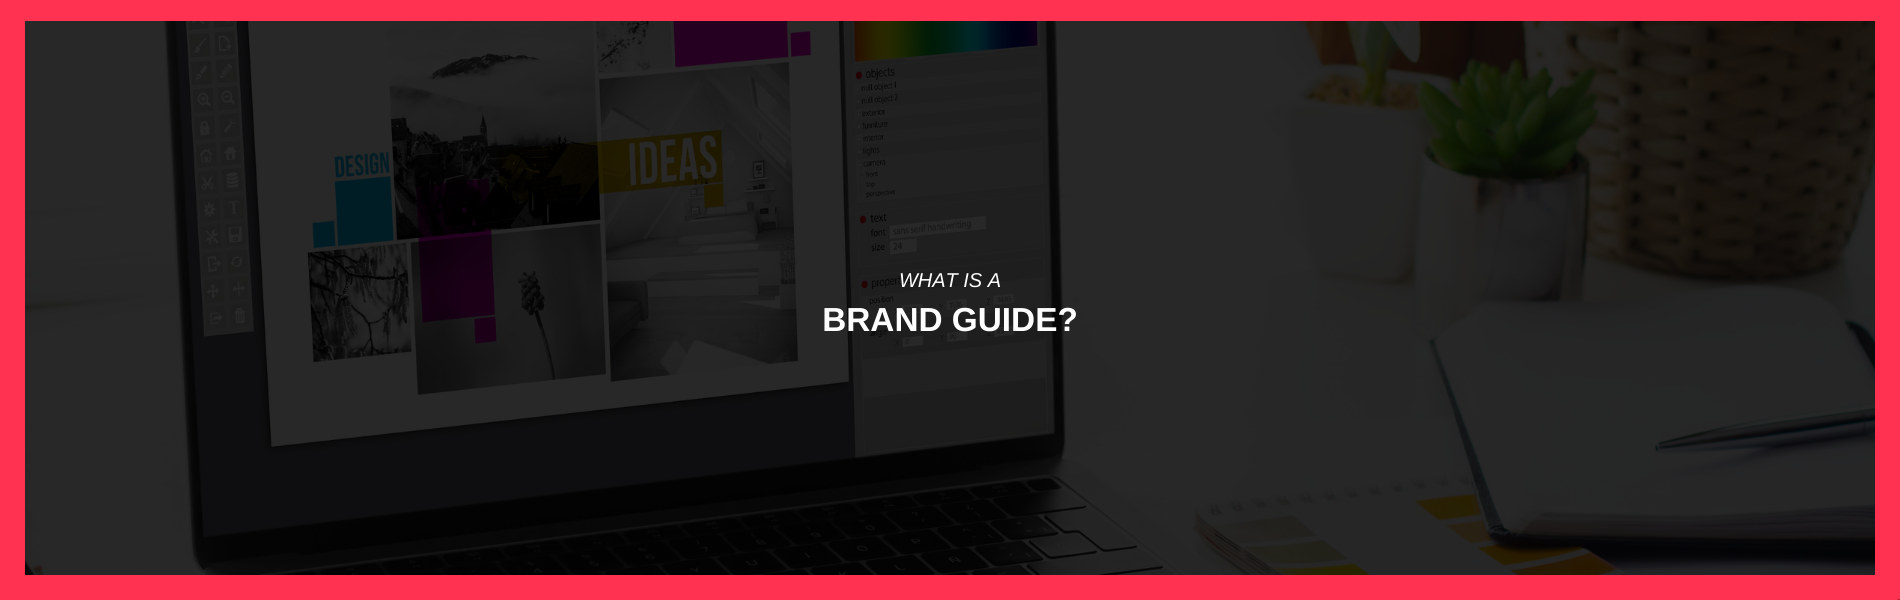 Brand guides help you provide a consistent customer experience.